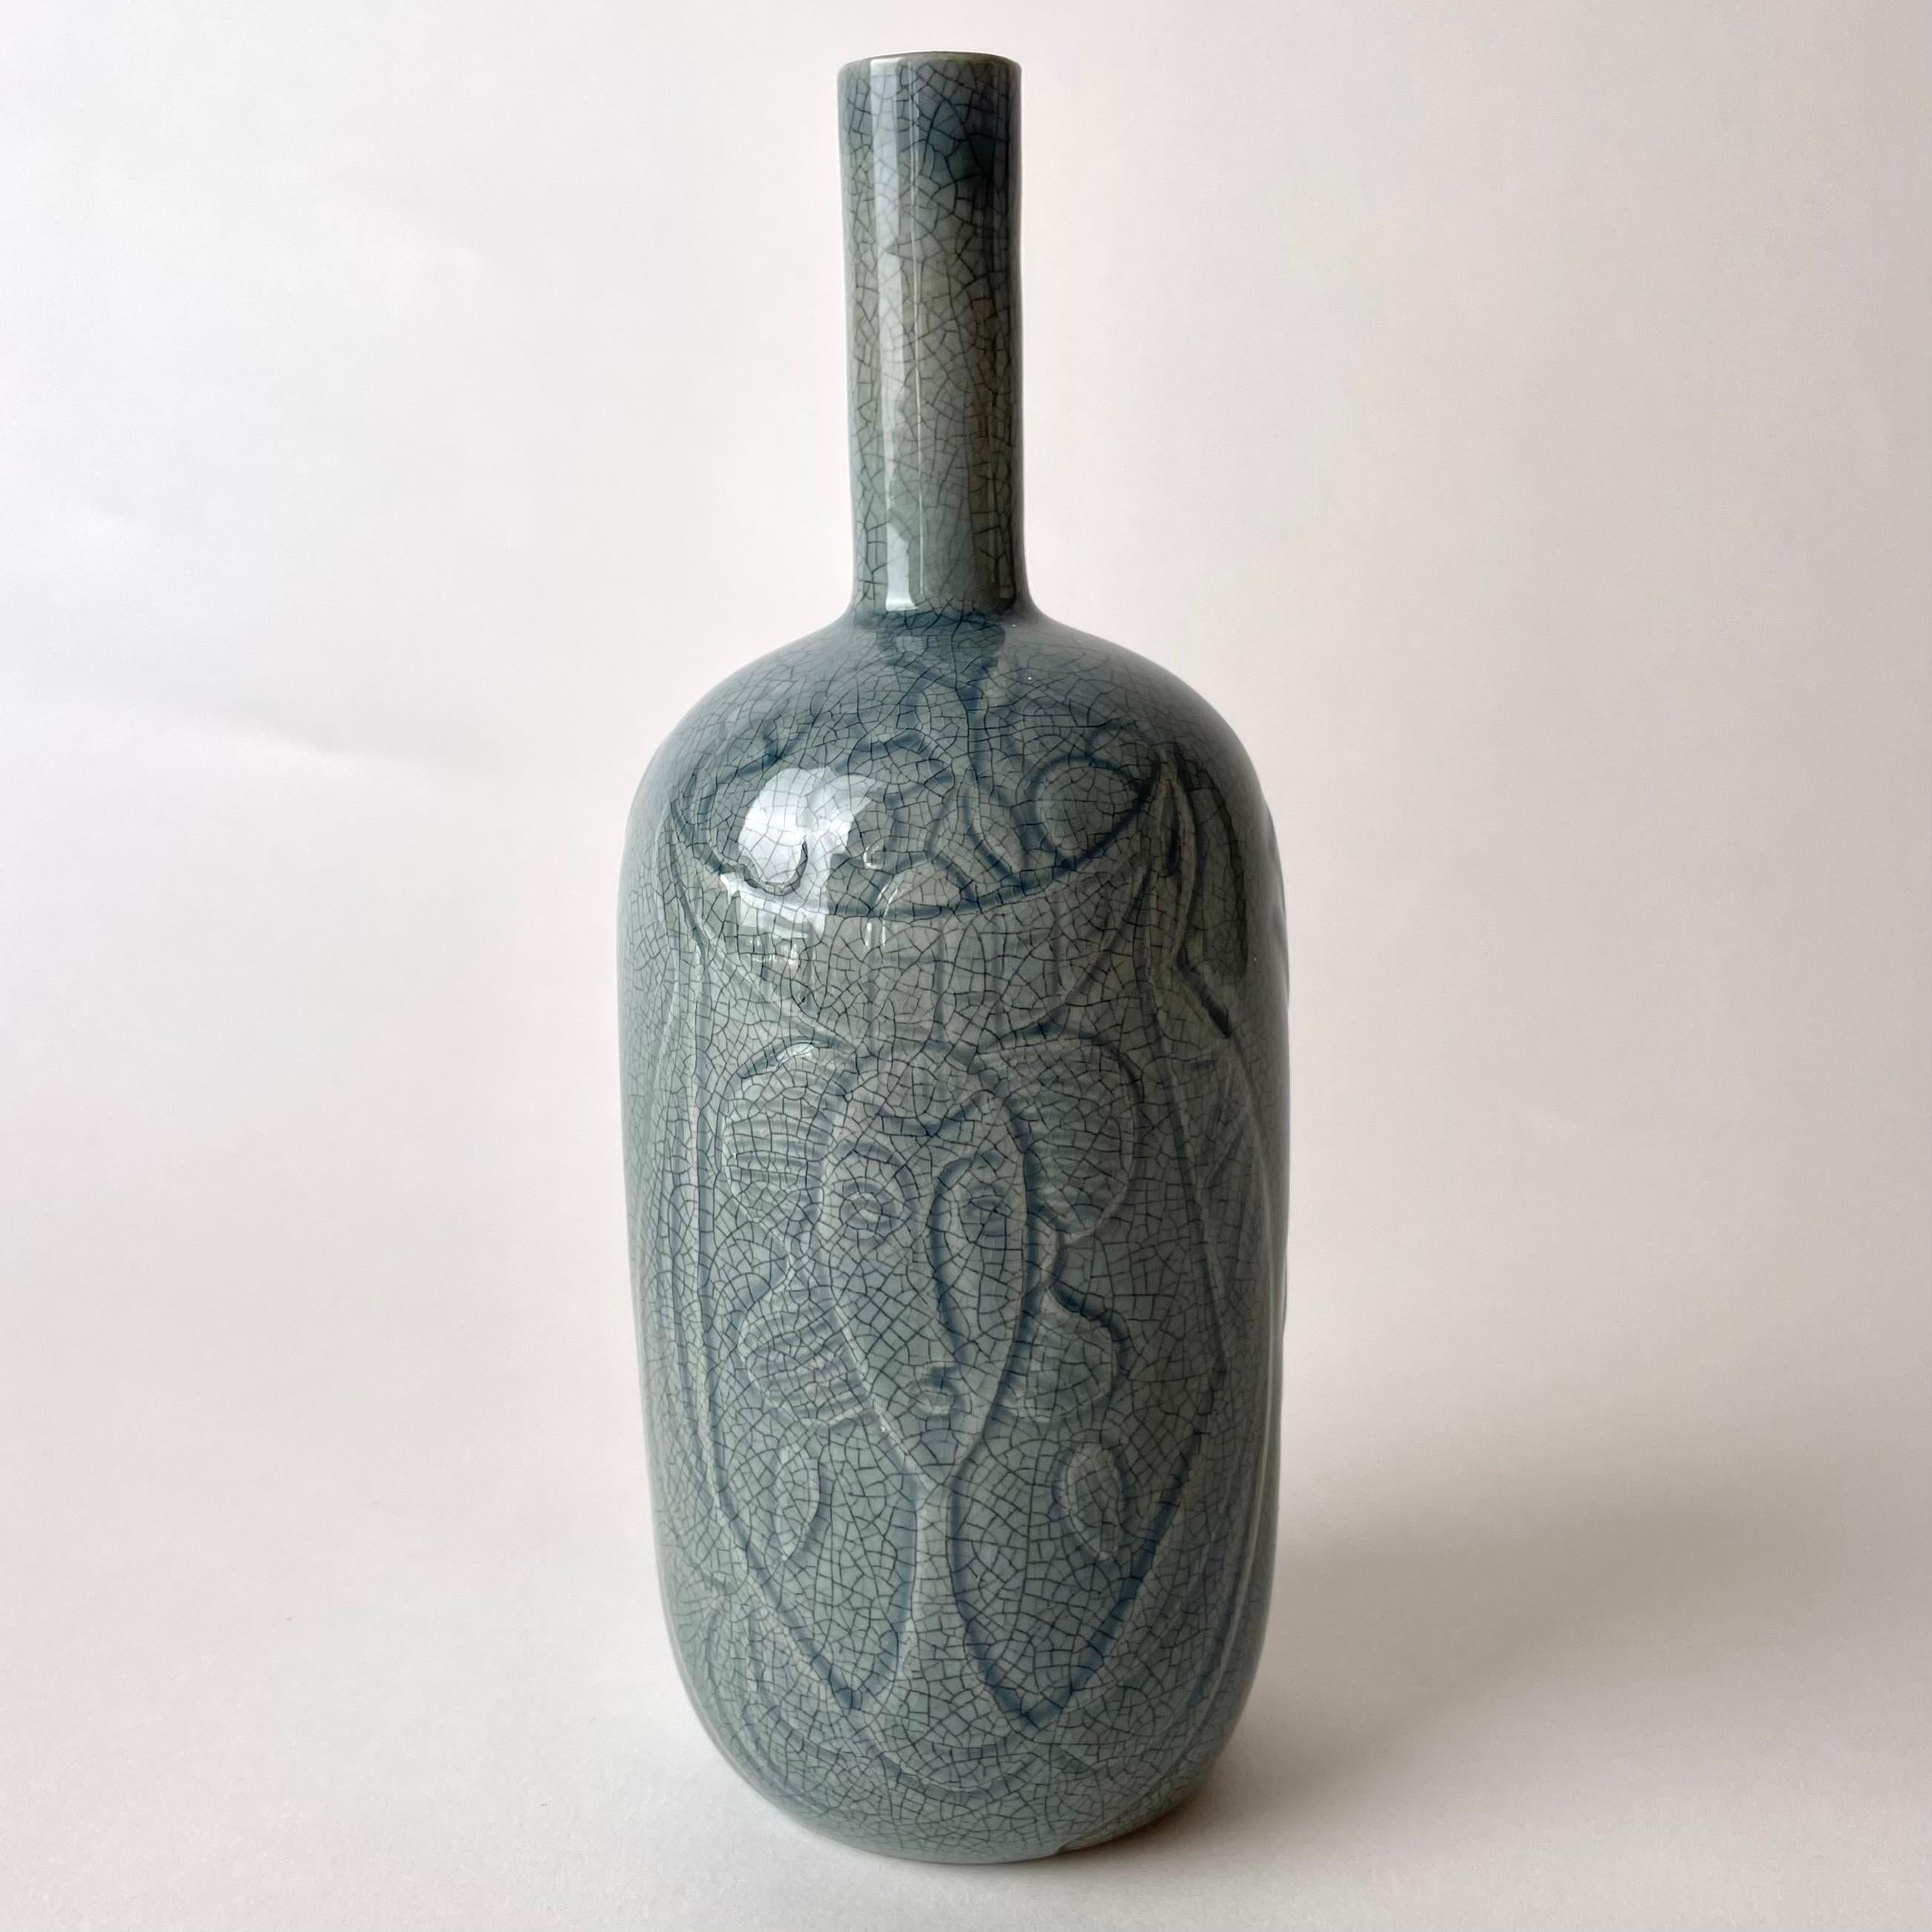 Mid-Century Modern Beautiful ceramic Vase by Carl-Harry Stålhane, Sweden from the Mid-20th Century For Sale